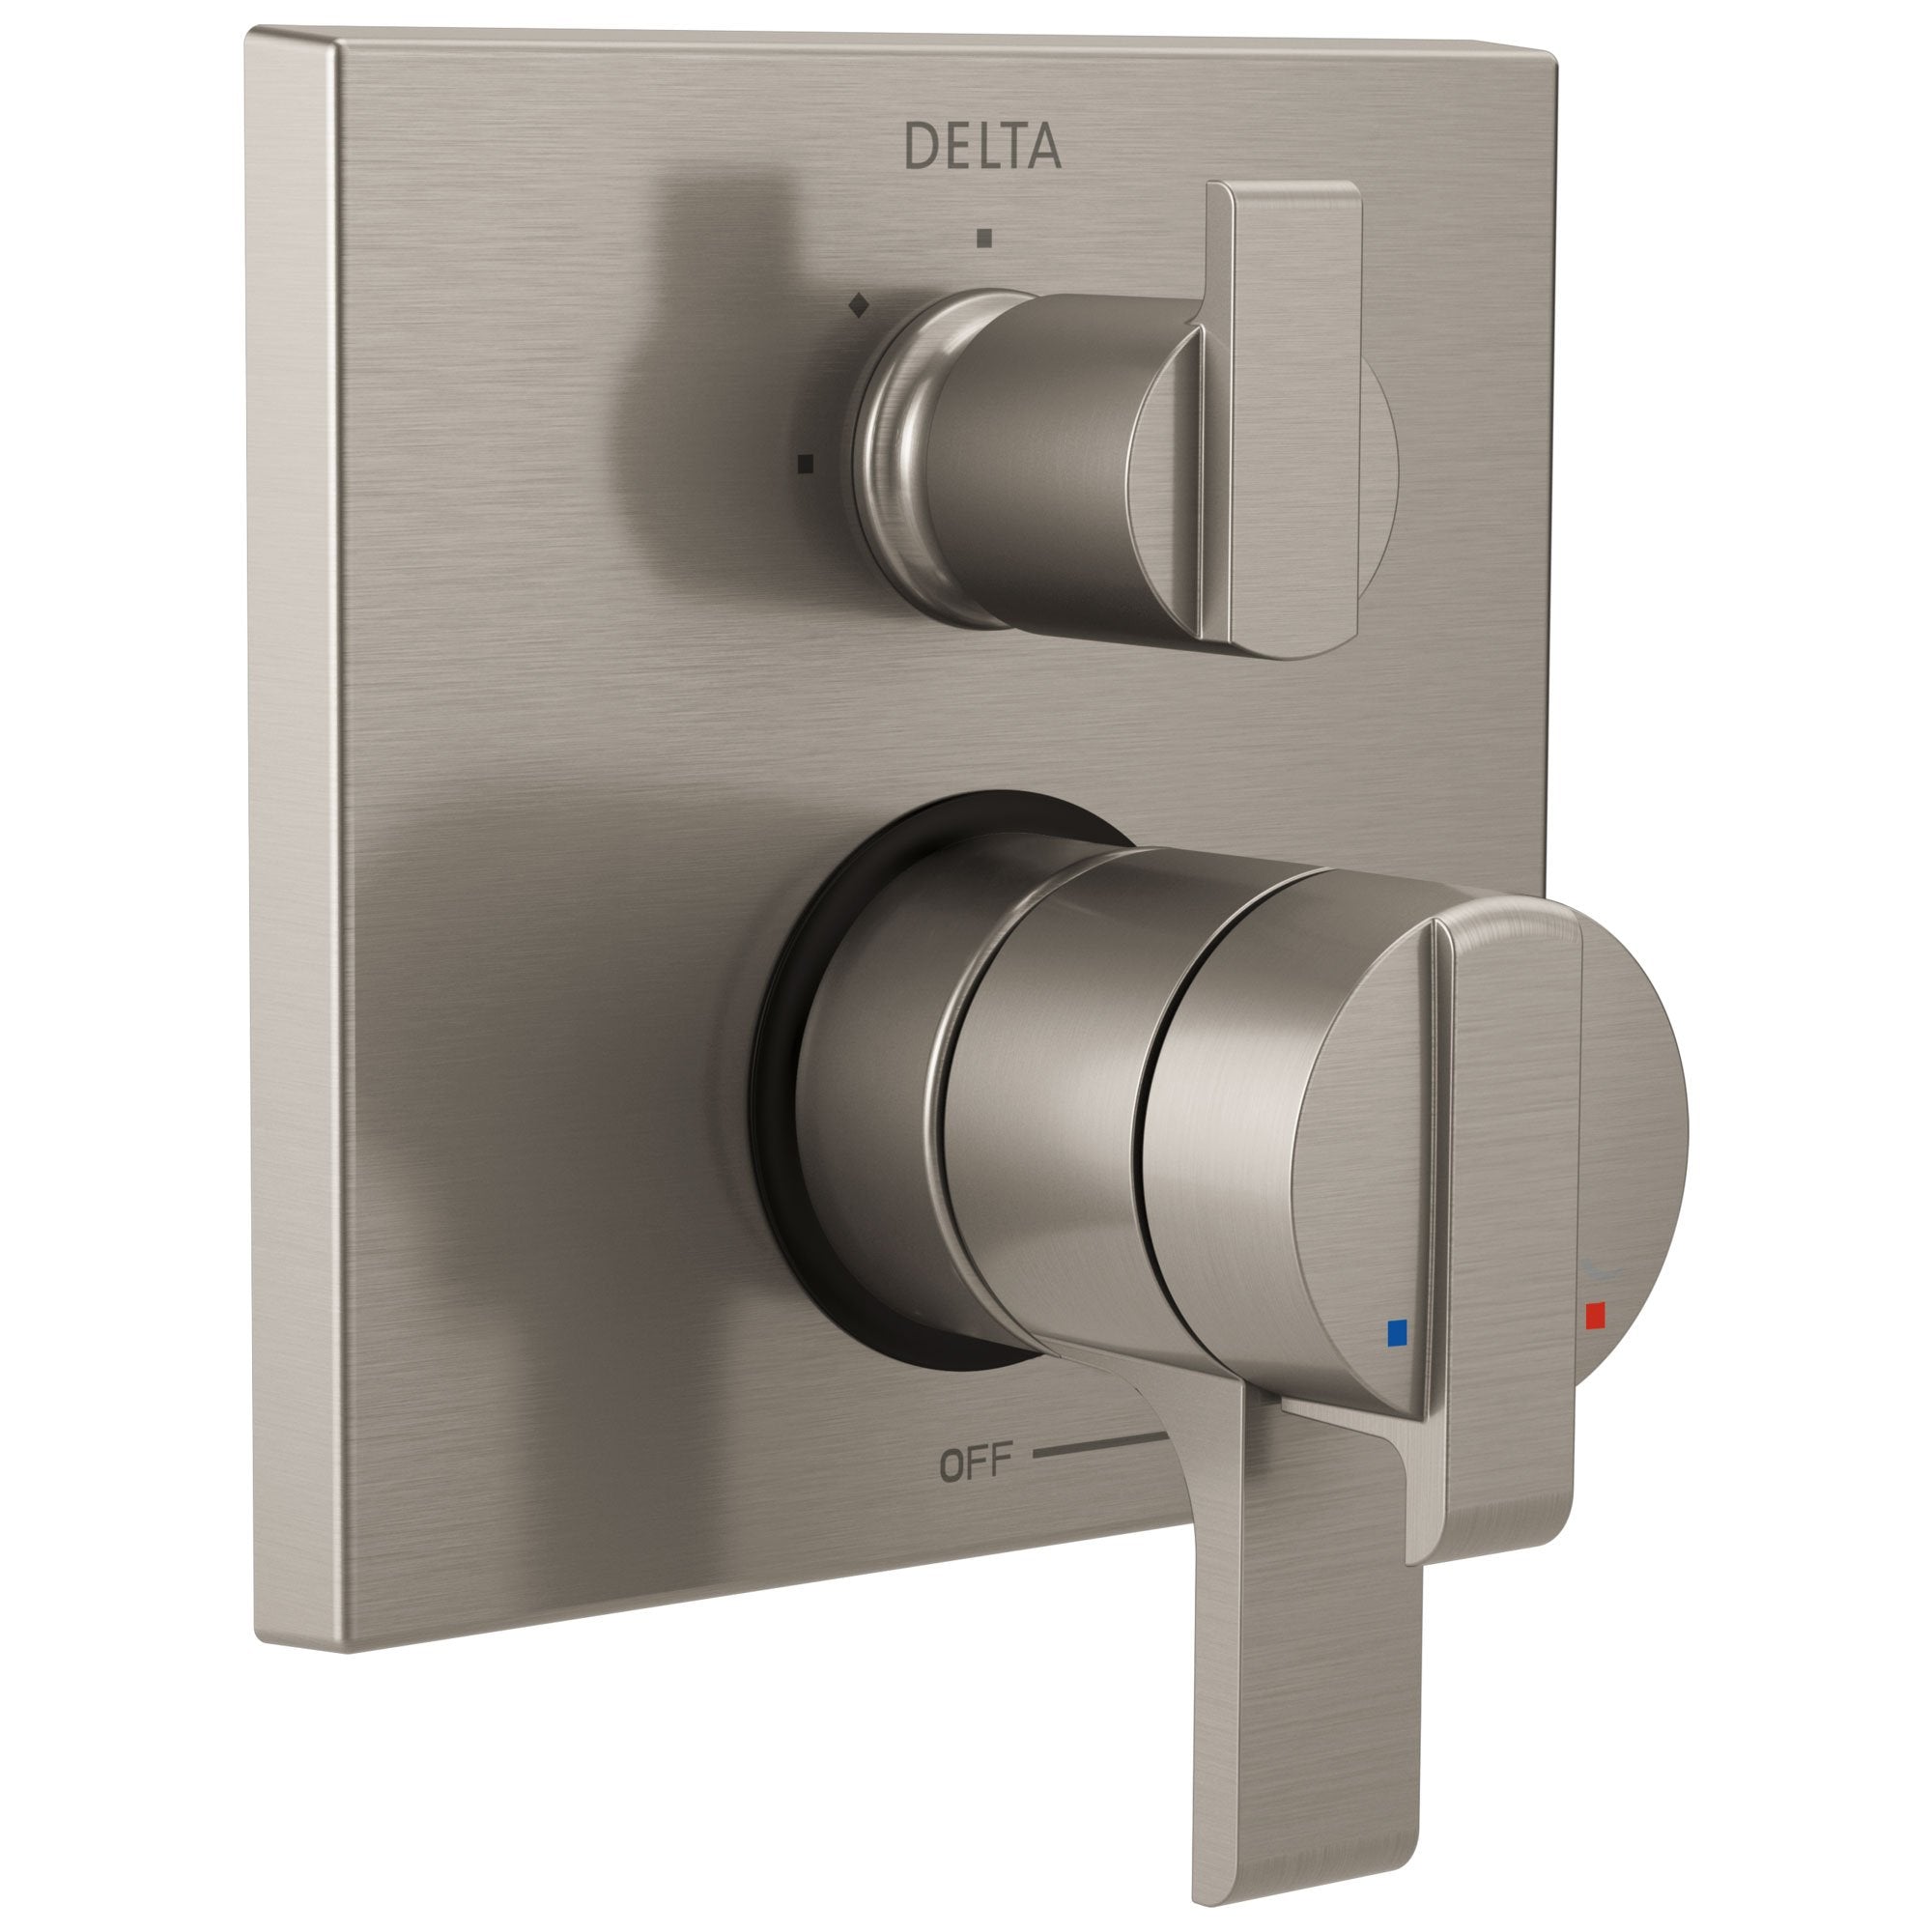 Delta Ara Collection Stainless Steel Finish Modern Shower Faucet Control Handle with 3-Setting Integrated Diverter Includes Trim Kit and Valve without Stops D2169V